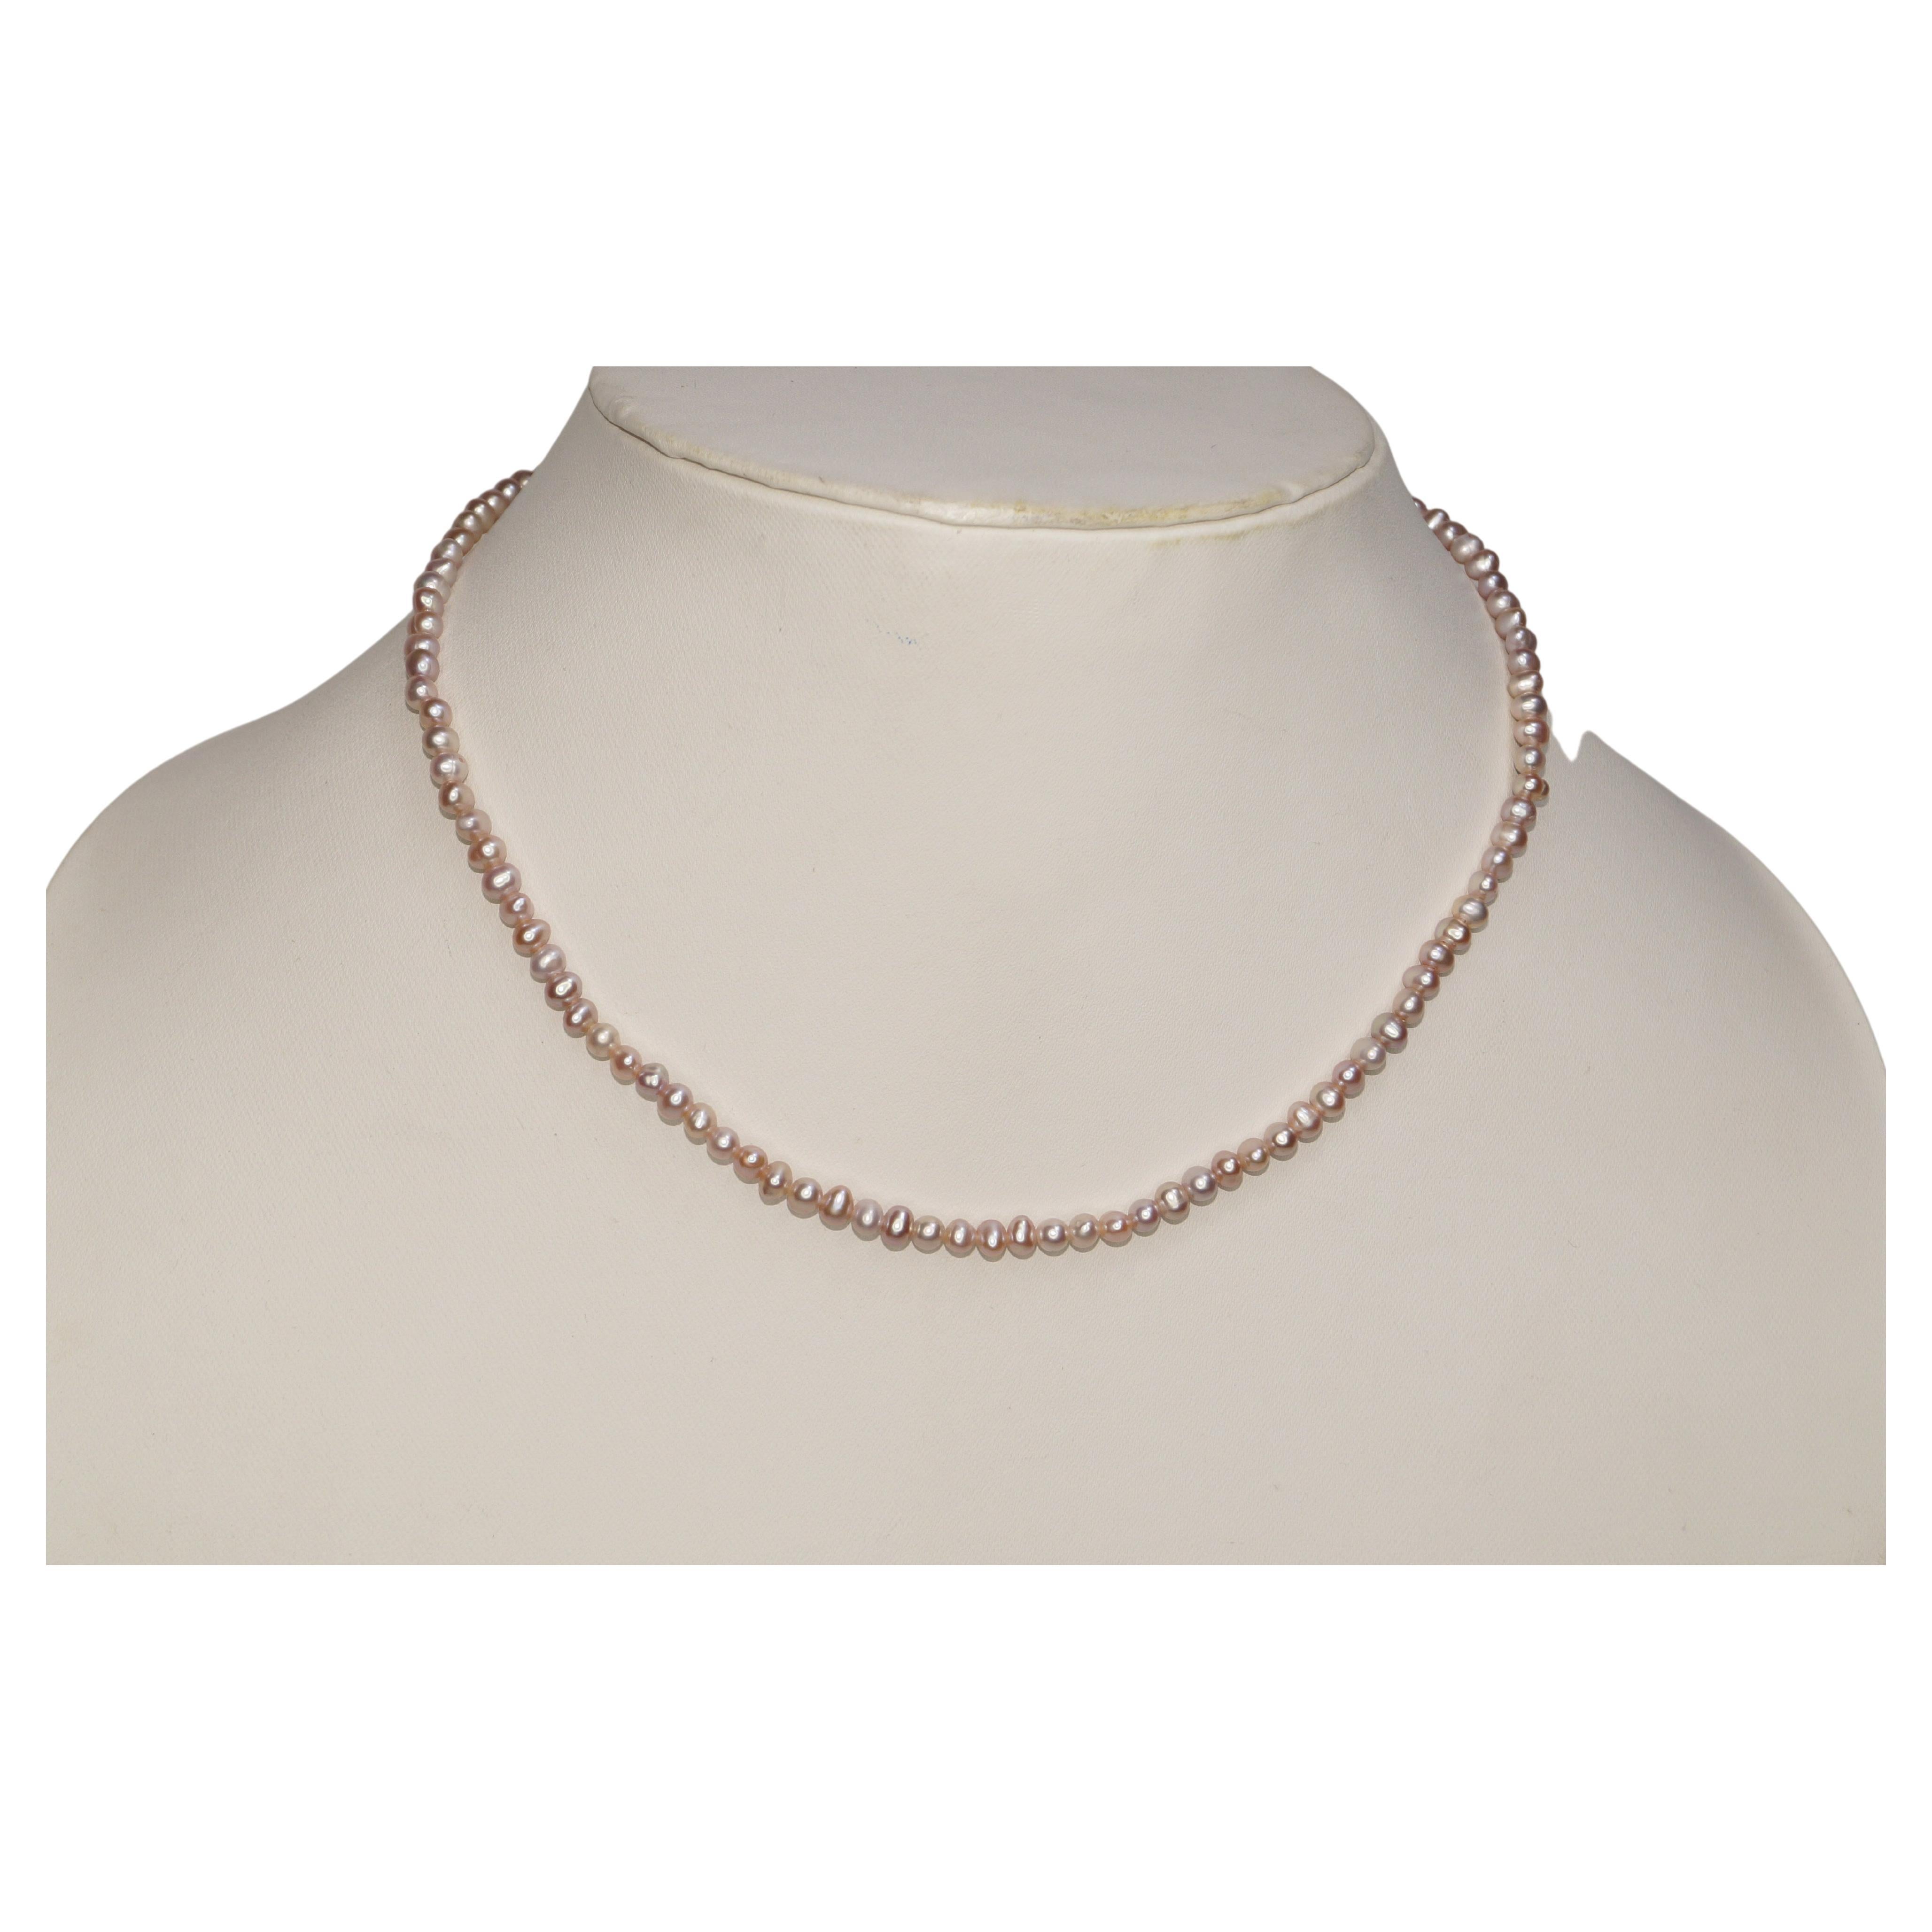 Classy 14k Gold Light Pink Tiny Pearl necklace 4-5mm Freshwater Royal necklace 